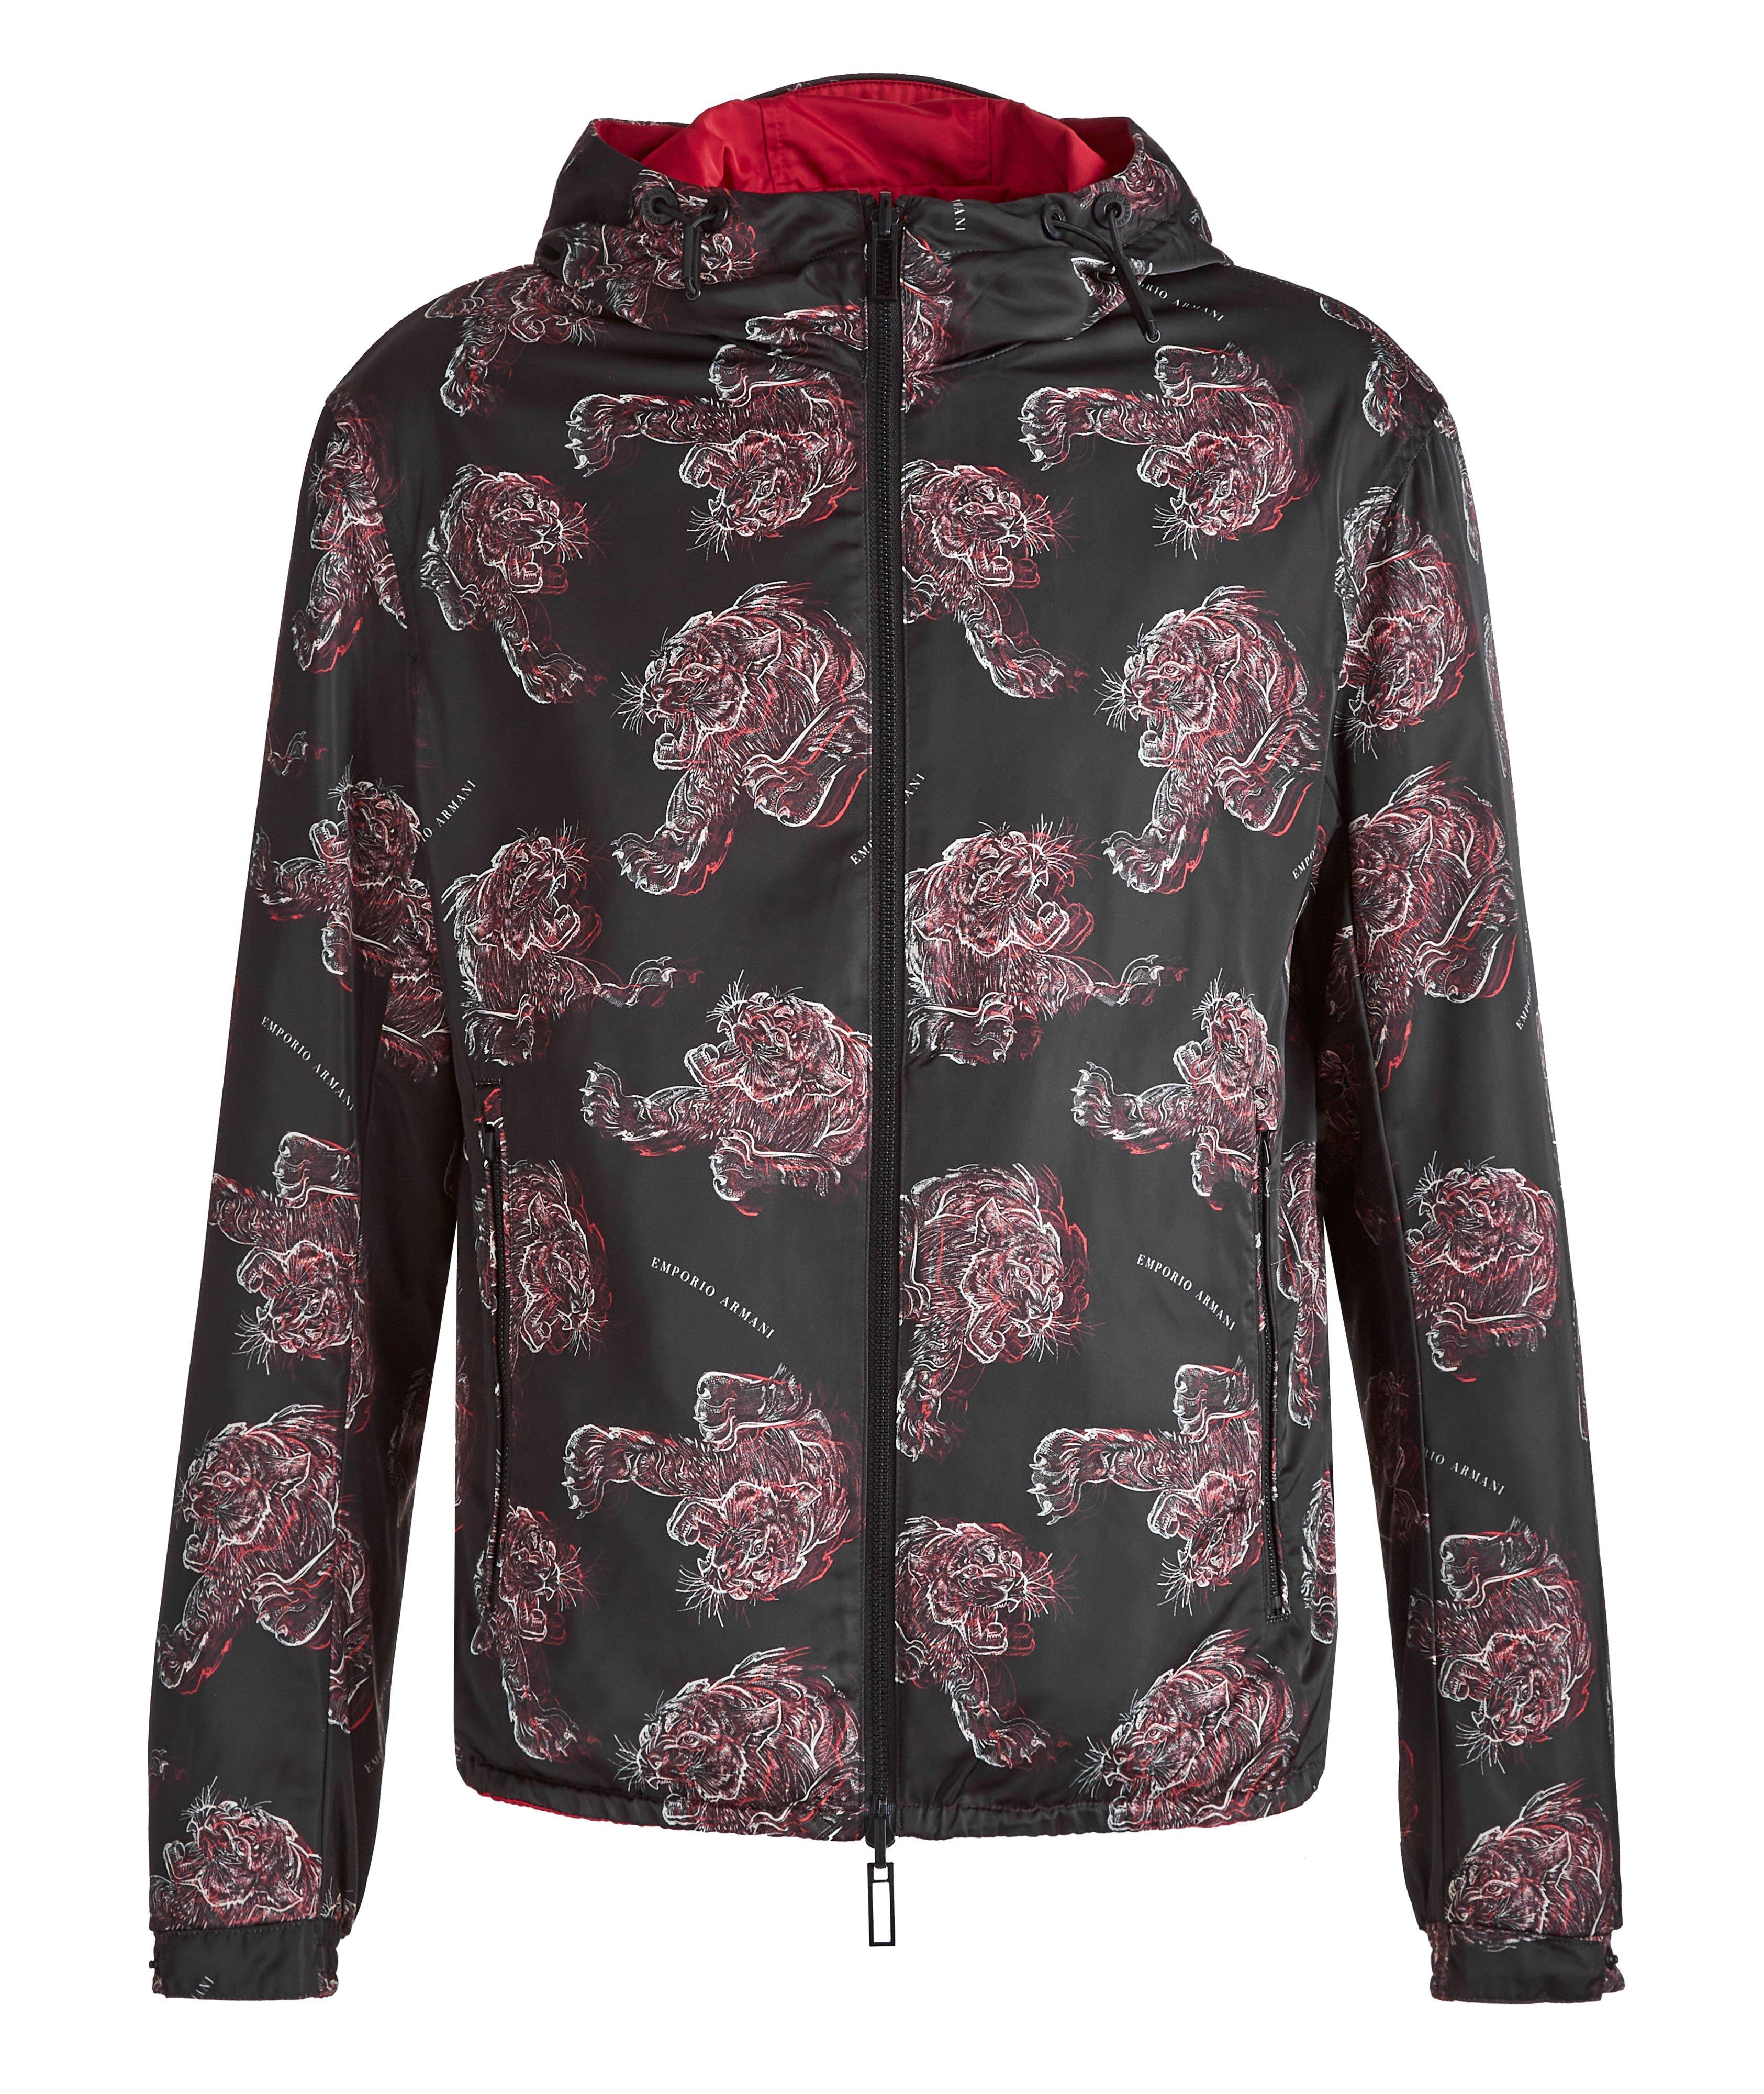 Chinese New Year Tiger Print Hooded Jacket image 0